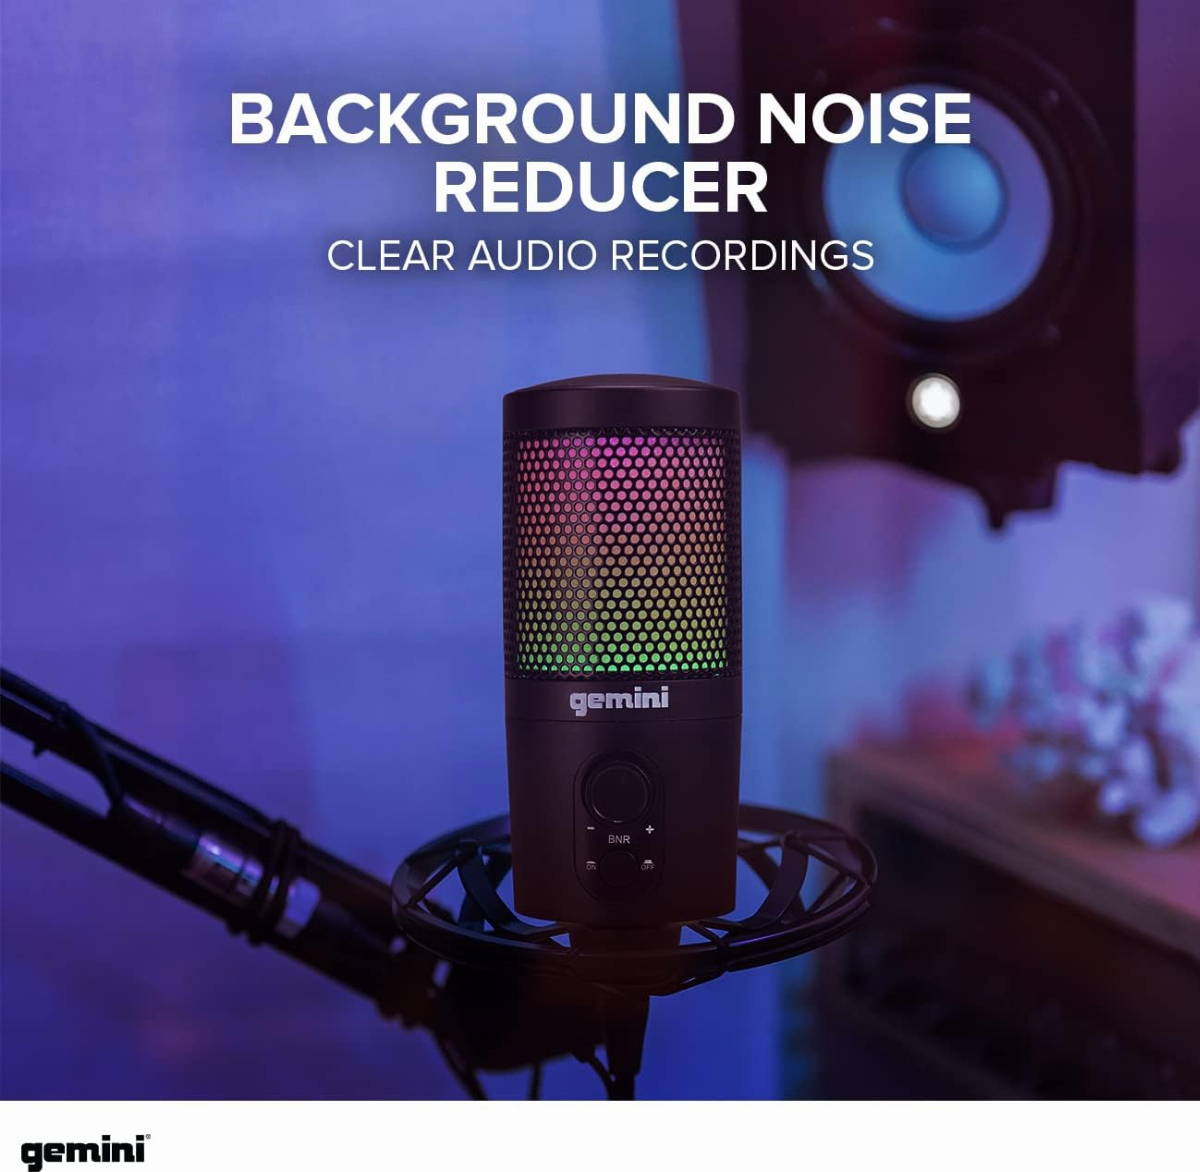 Condenser　Reduction　Streaming,　Controls　GSM-100　USB　Noise　Zoom　PC　Podcasting,　Headphone　with　Background　Computer　Jack,　and　Microphone　LED　RGB　Twitch,　Lights,　Gaming,　Volume　for　Live　Chat,　Gemini　Sound